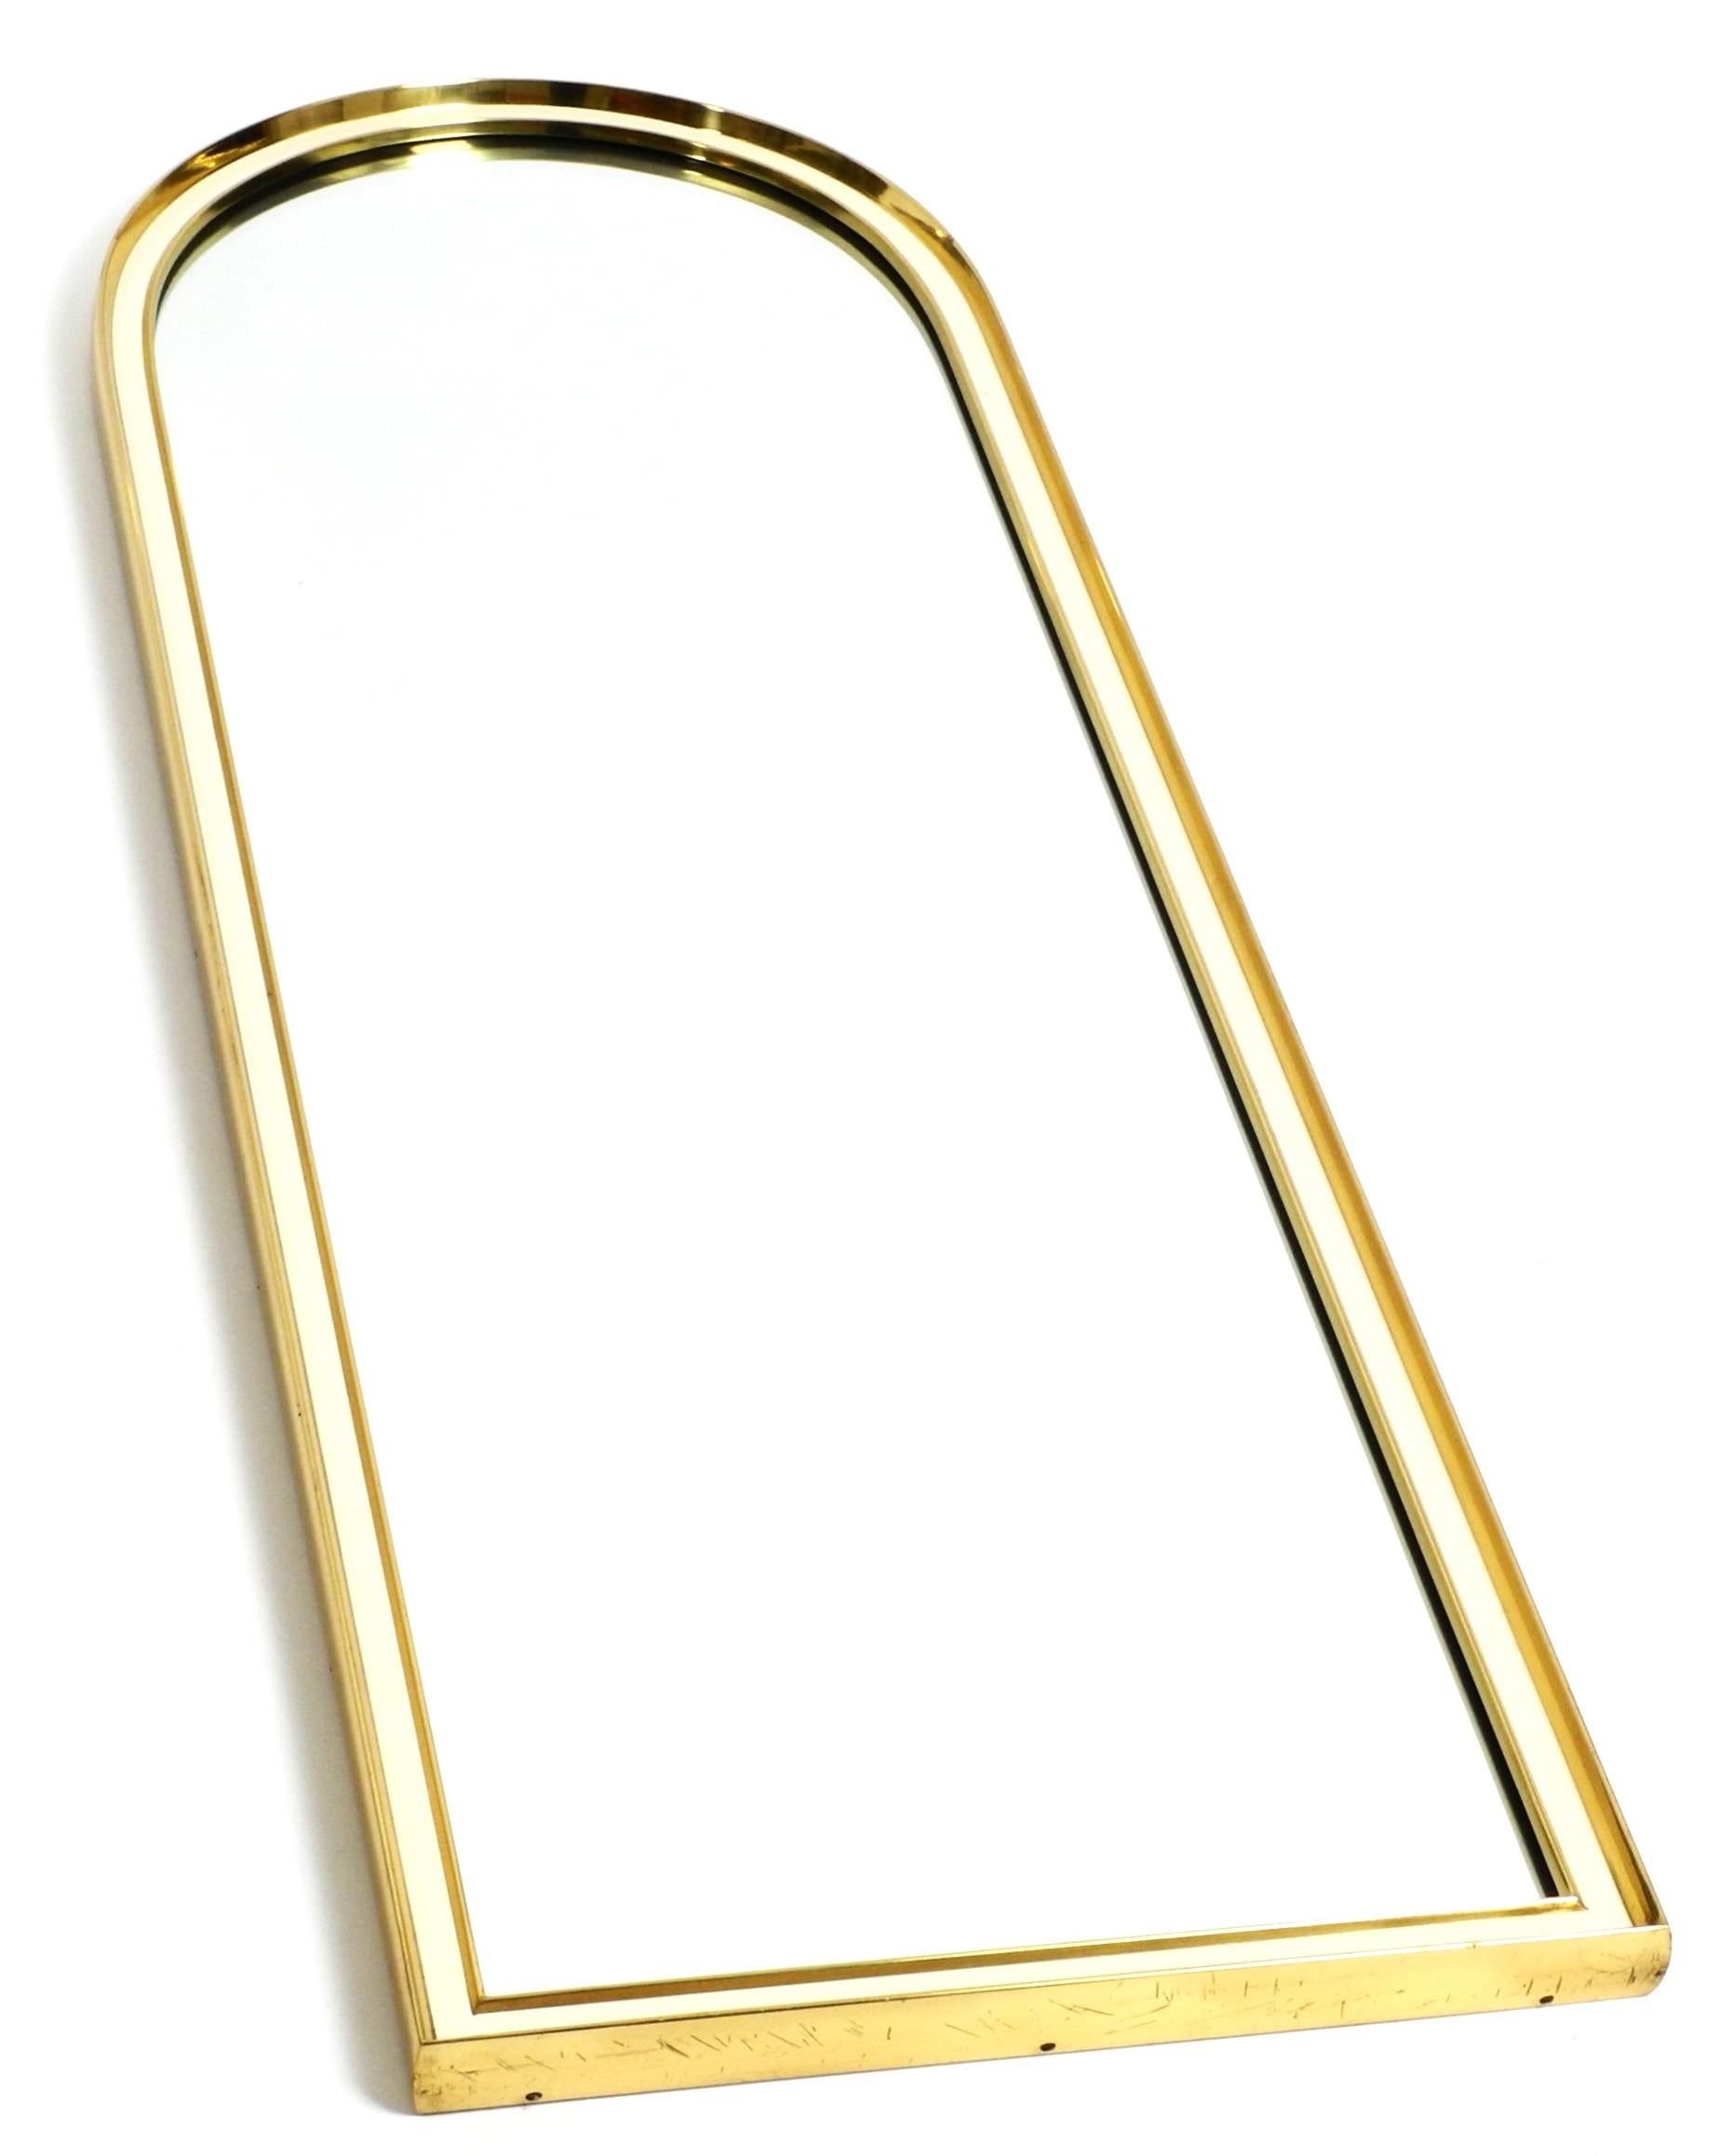 Extraordinary mid-century brass wall mirror by Vereinigte Werkstätten München, made in Germany.

Great 1970s elegant design. Very high quality production. Heavy and very solidly built. An unusually thick, continuous brass frame, which is finished